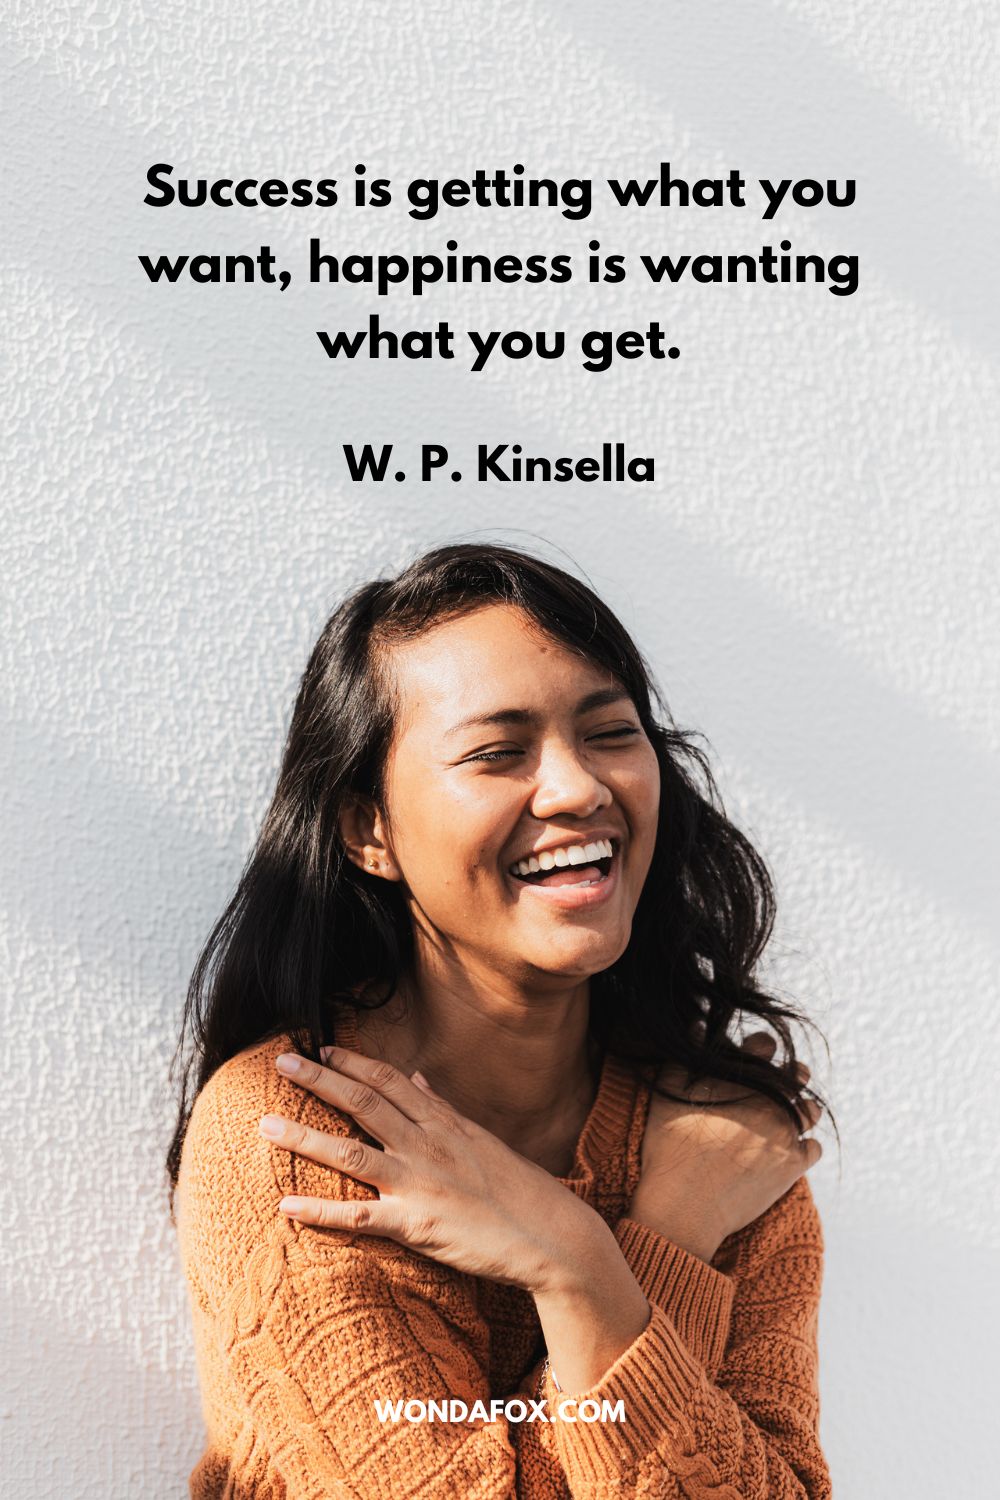 Success is getting what you want, happiness is wanting what you get. W. P. Kinsella